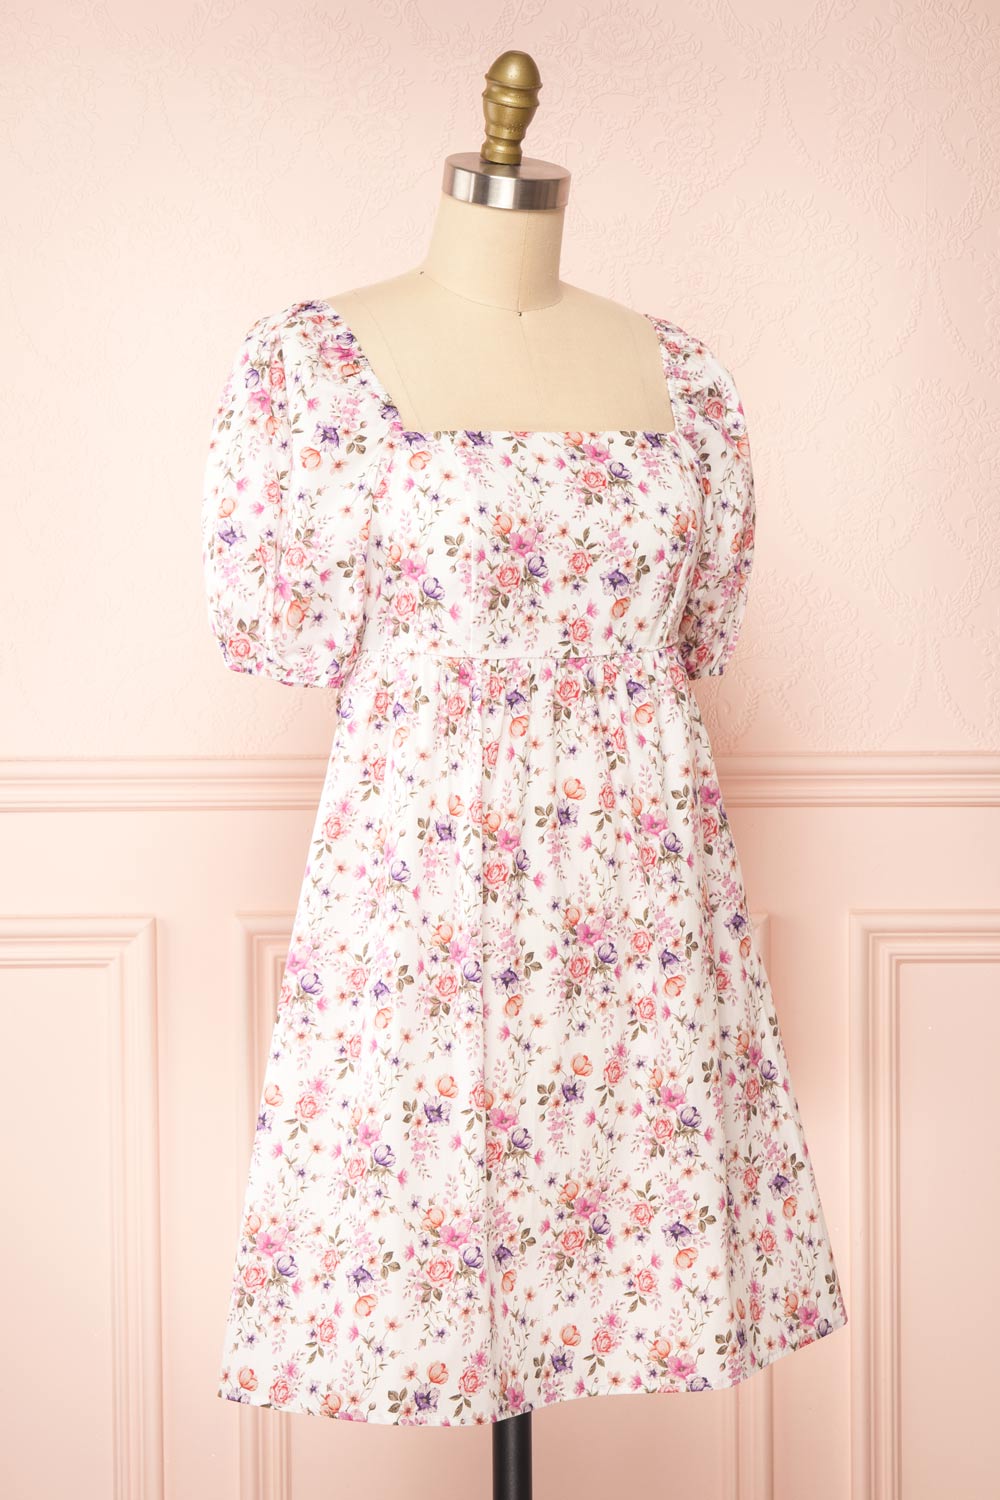 Caritas White Short Floral Dress w/ Puffy Sleeves | Boutique 1861  side view